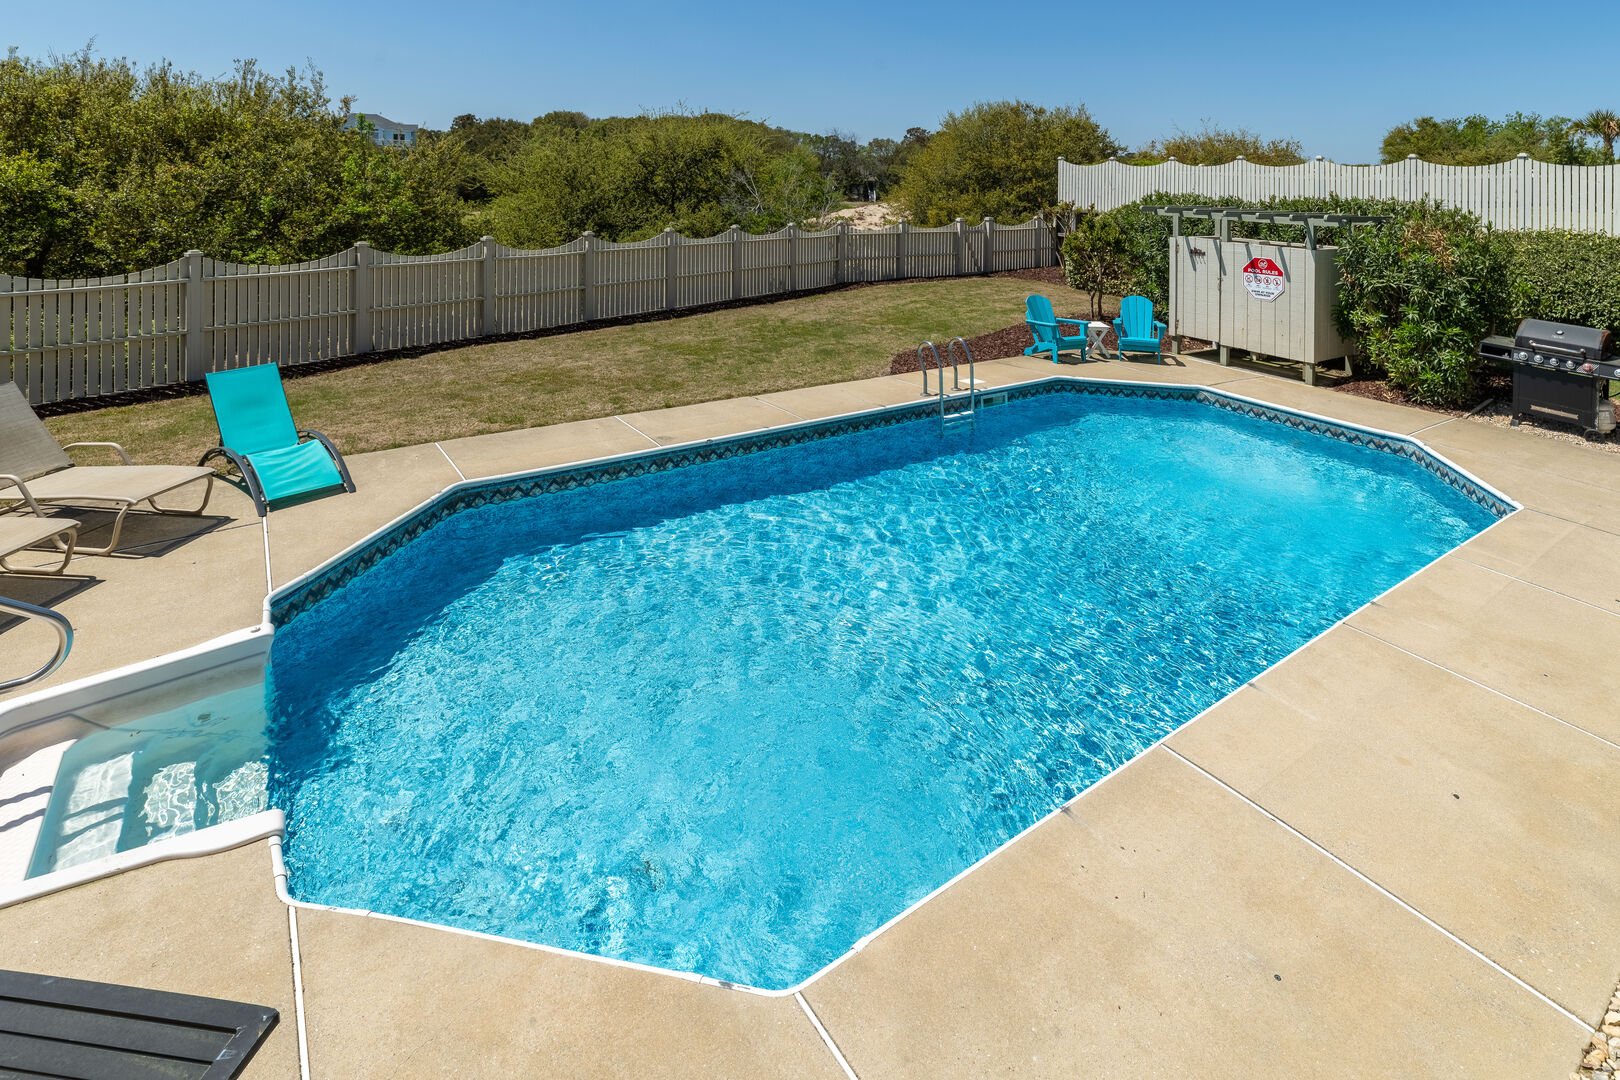 Private Pool: open mid-May - Oct. 1